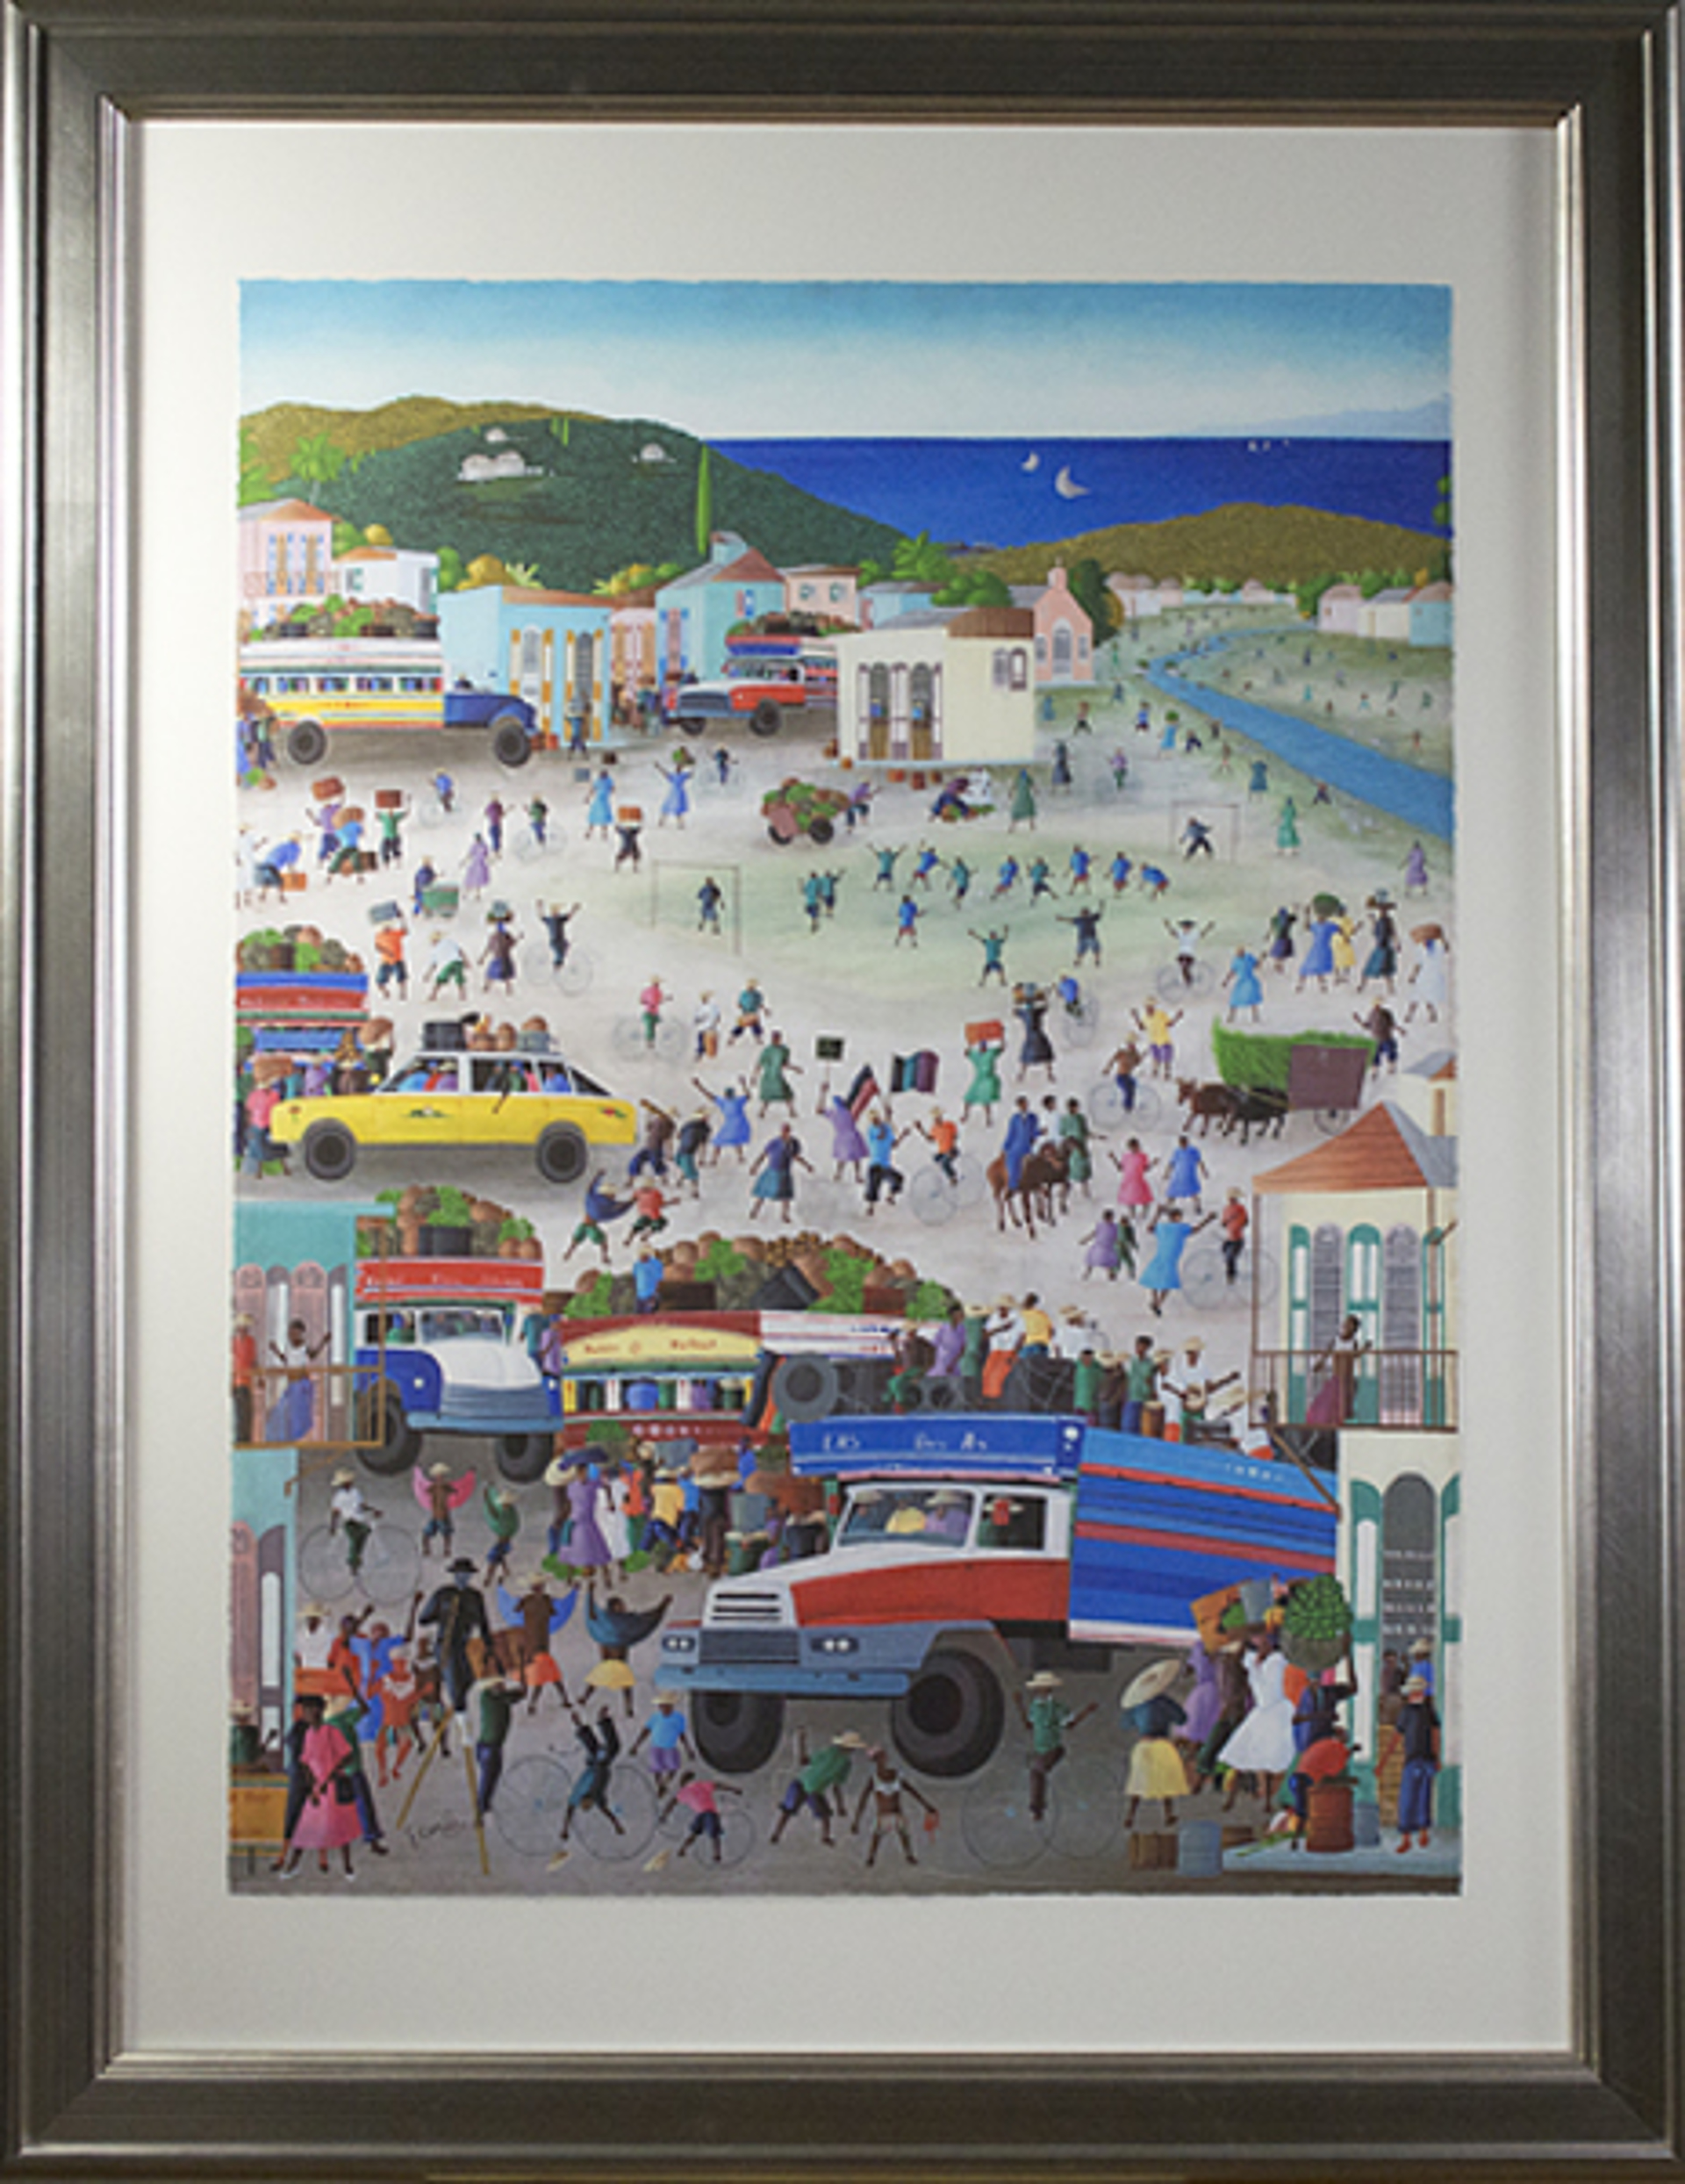 Haitian Village Market by the Sea by Fritz Camille (Haitian)